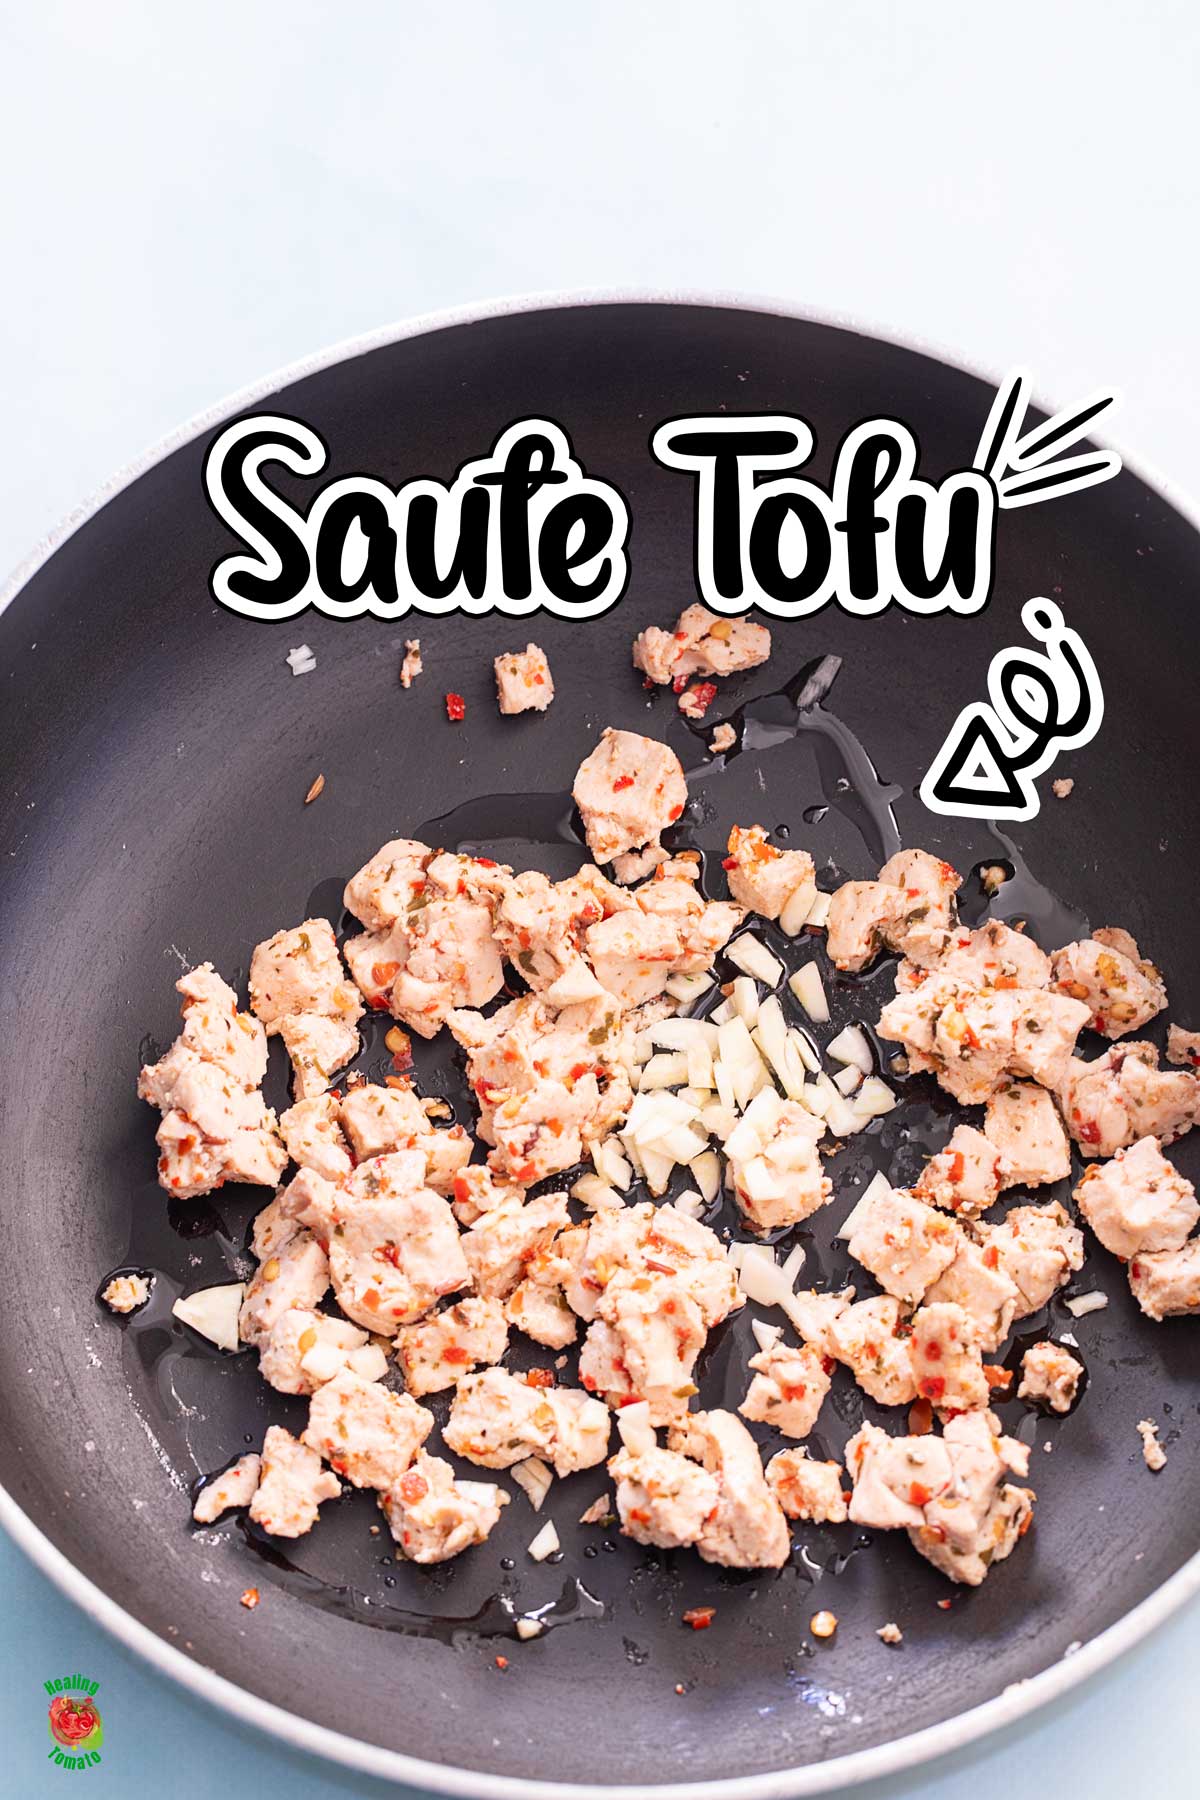 Top view of harissa marinated tofu in a wok with garlic. Title of "saute tofu"